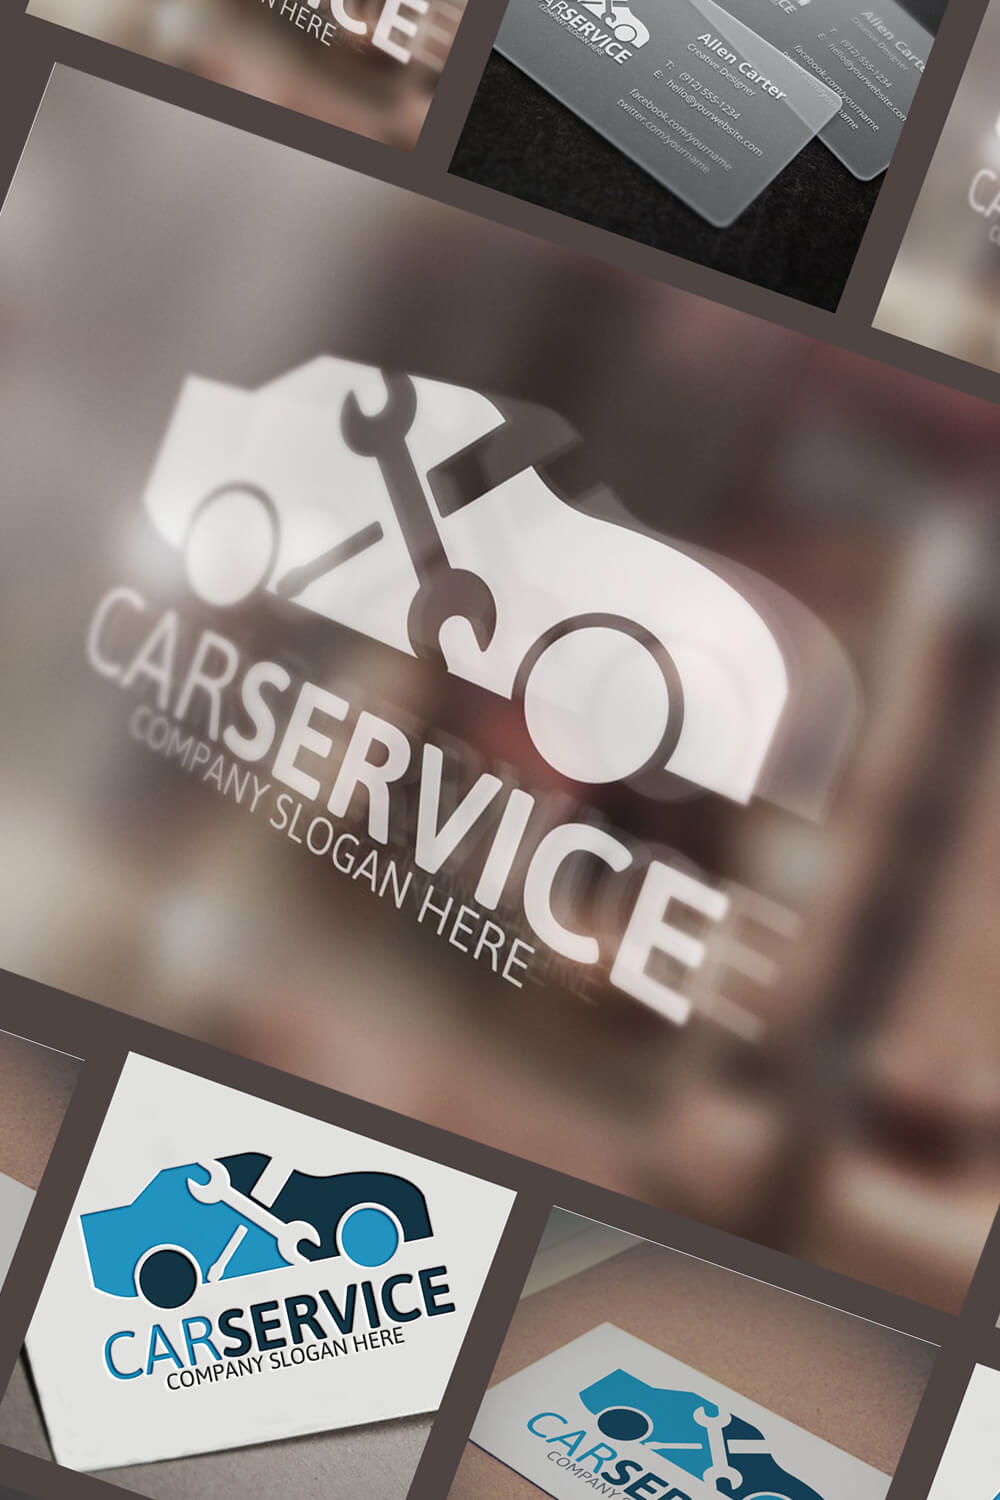 Diagonal image with a white car service logo on a blurred background.